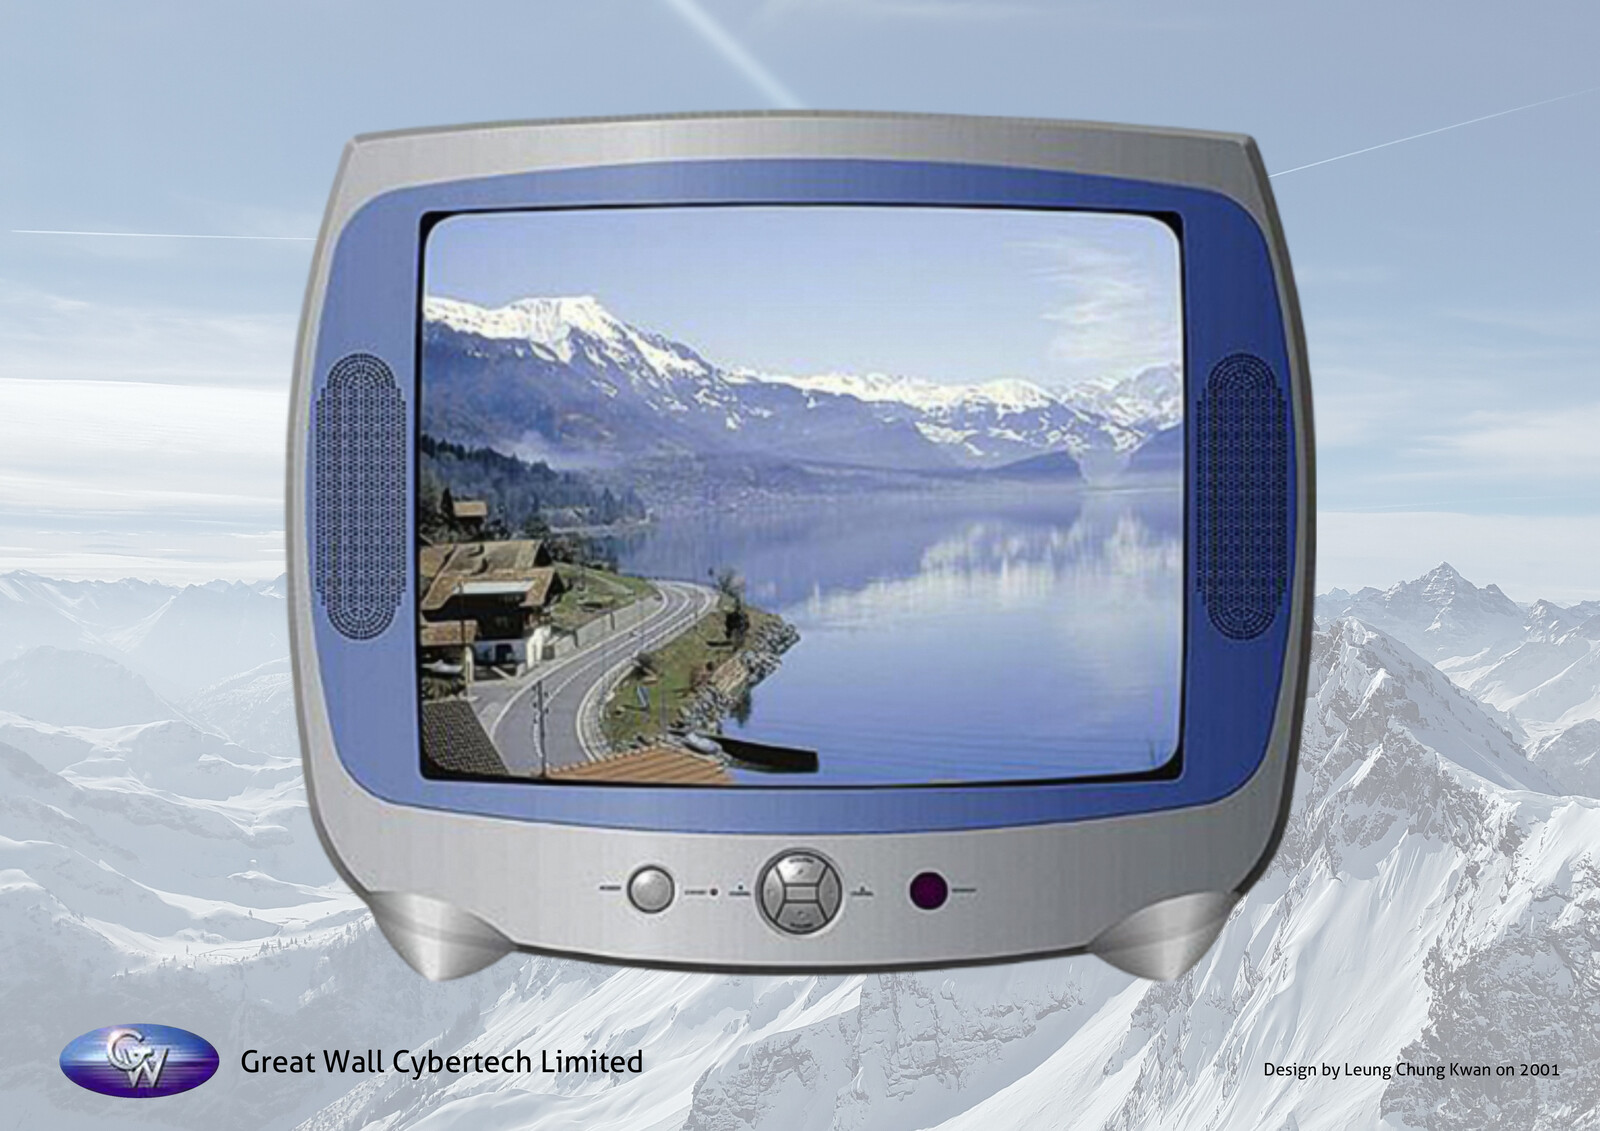 💎 CRT Color TV | Design by Leung Chung Kwan on 2001 💎
Brand Name︰ROWA | Client︰Great Wall Cybertech Limited
More︰http://bit.ly/gw-t98